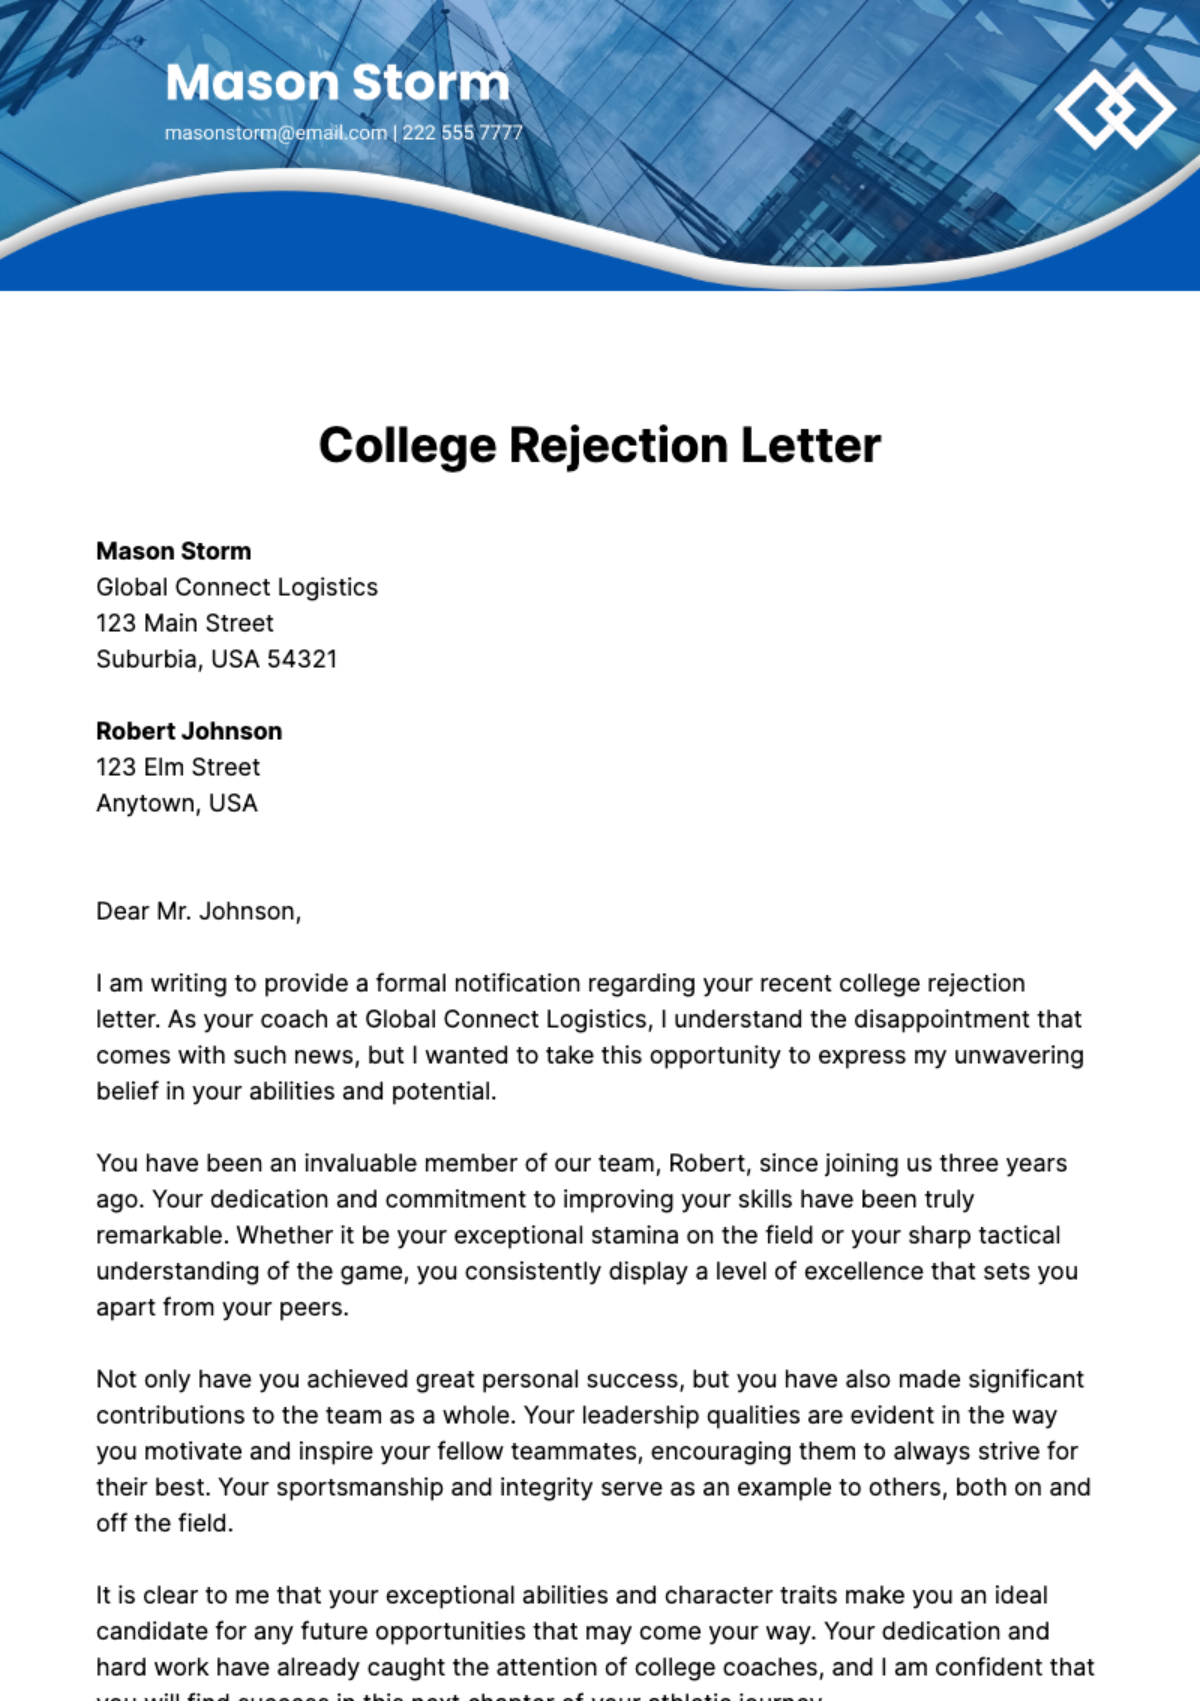 Free College Rejection Letter Template